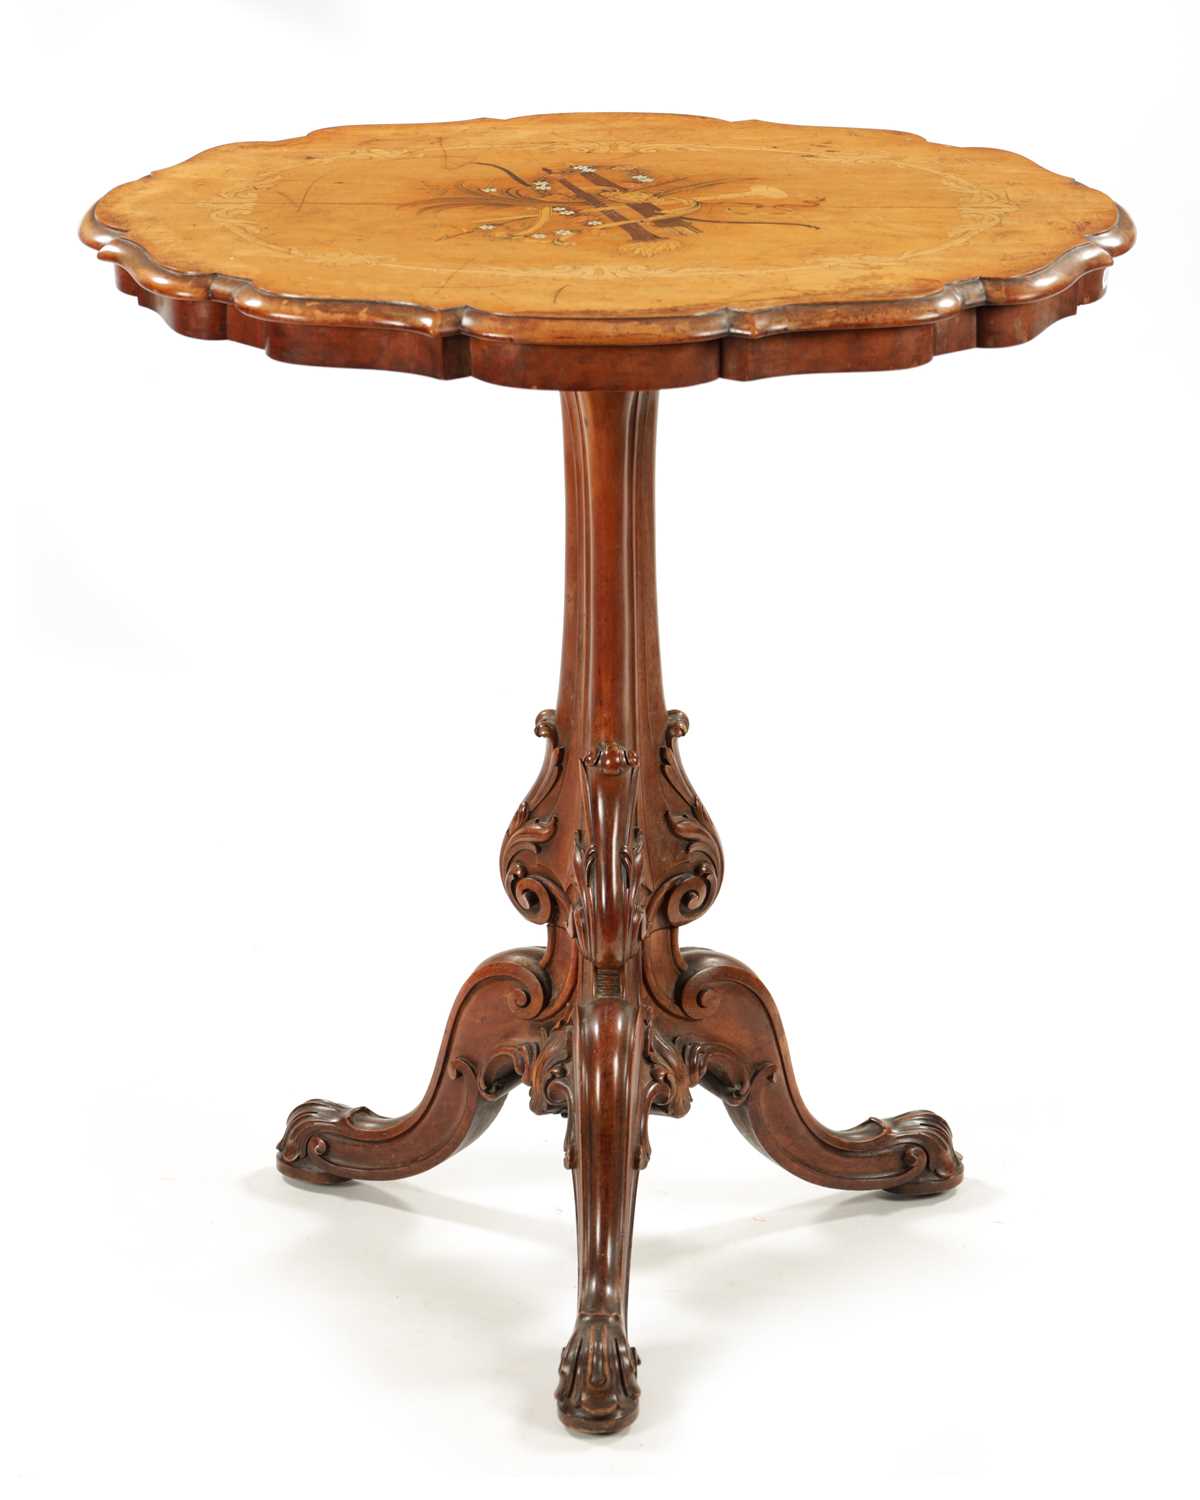 AN IMPORTANT 19TH CENTURY WALNUT AND MARQUETRY SALON TABLE